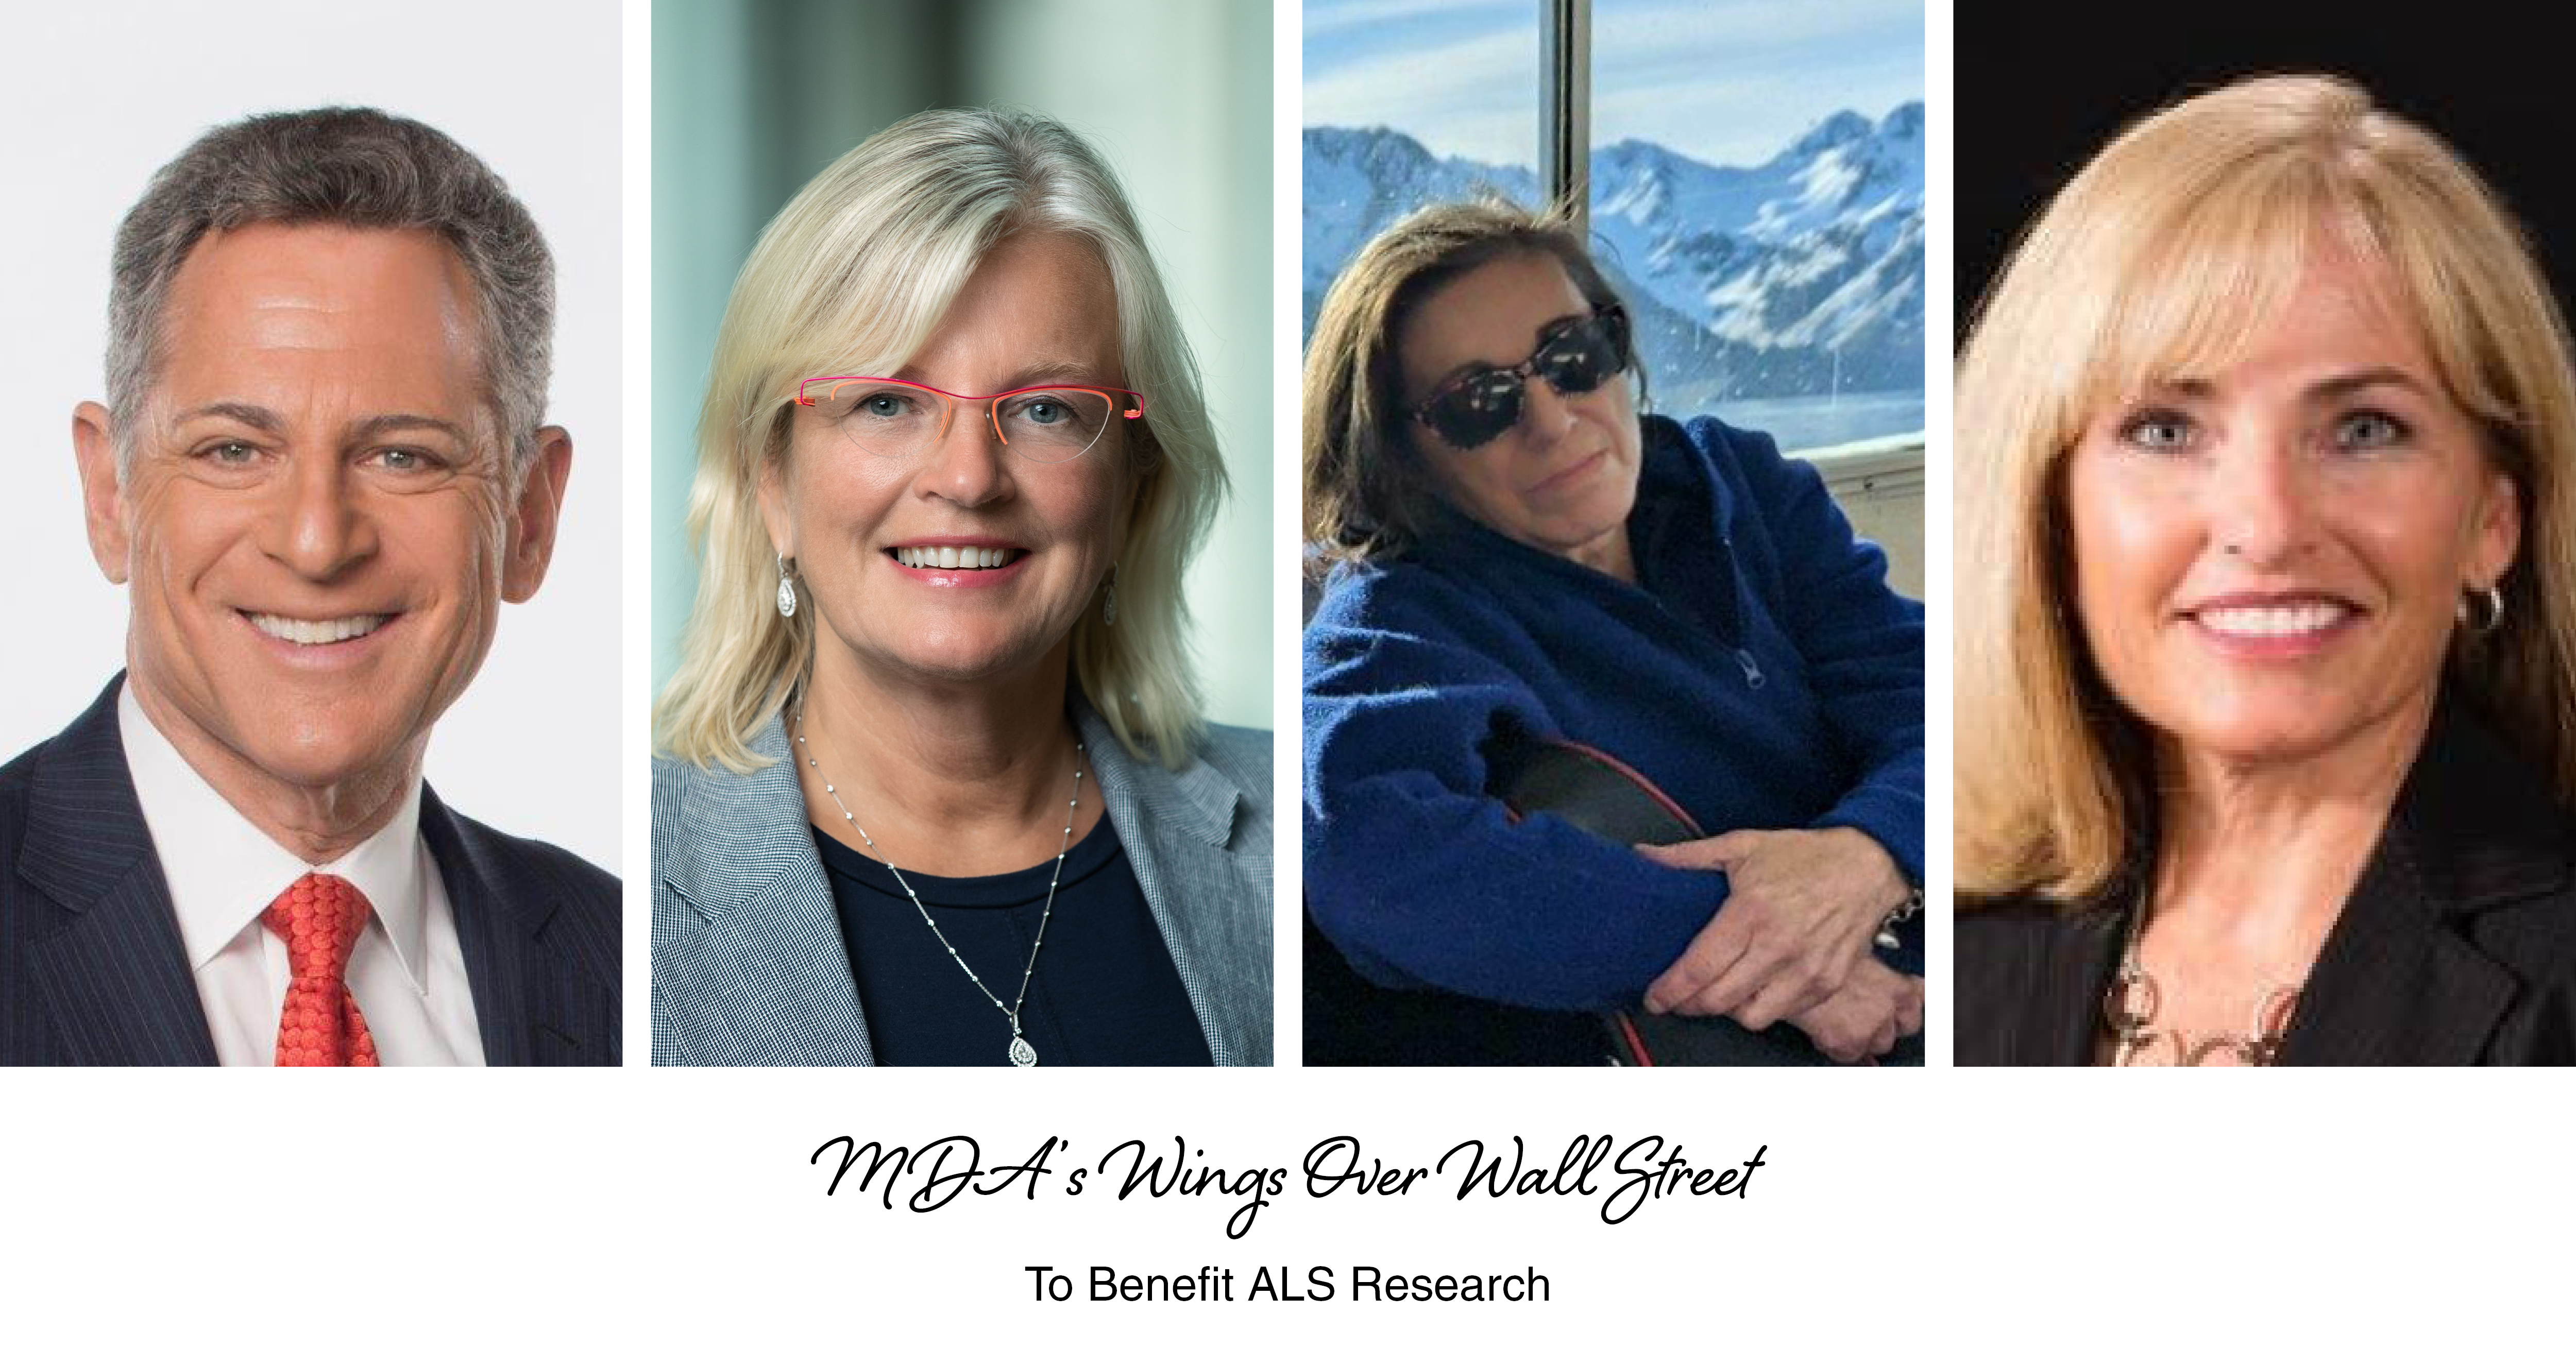 ABC Eyewitness News Anchor Bill Ritter to Host  Muscular Dystrophy Association’s 23rd Annual  Wings Over Wall Street Gala to Benefit ALS Research,  Honoring Dr. Angela Genge, Lisa Galante, R.N., Susan Jaycox